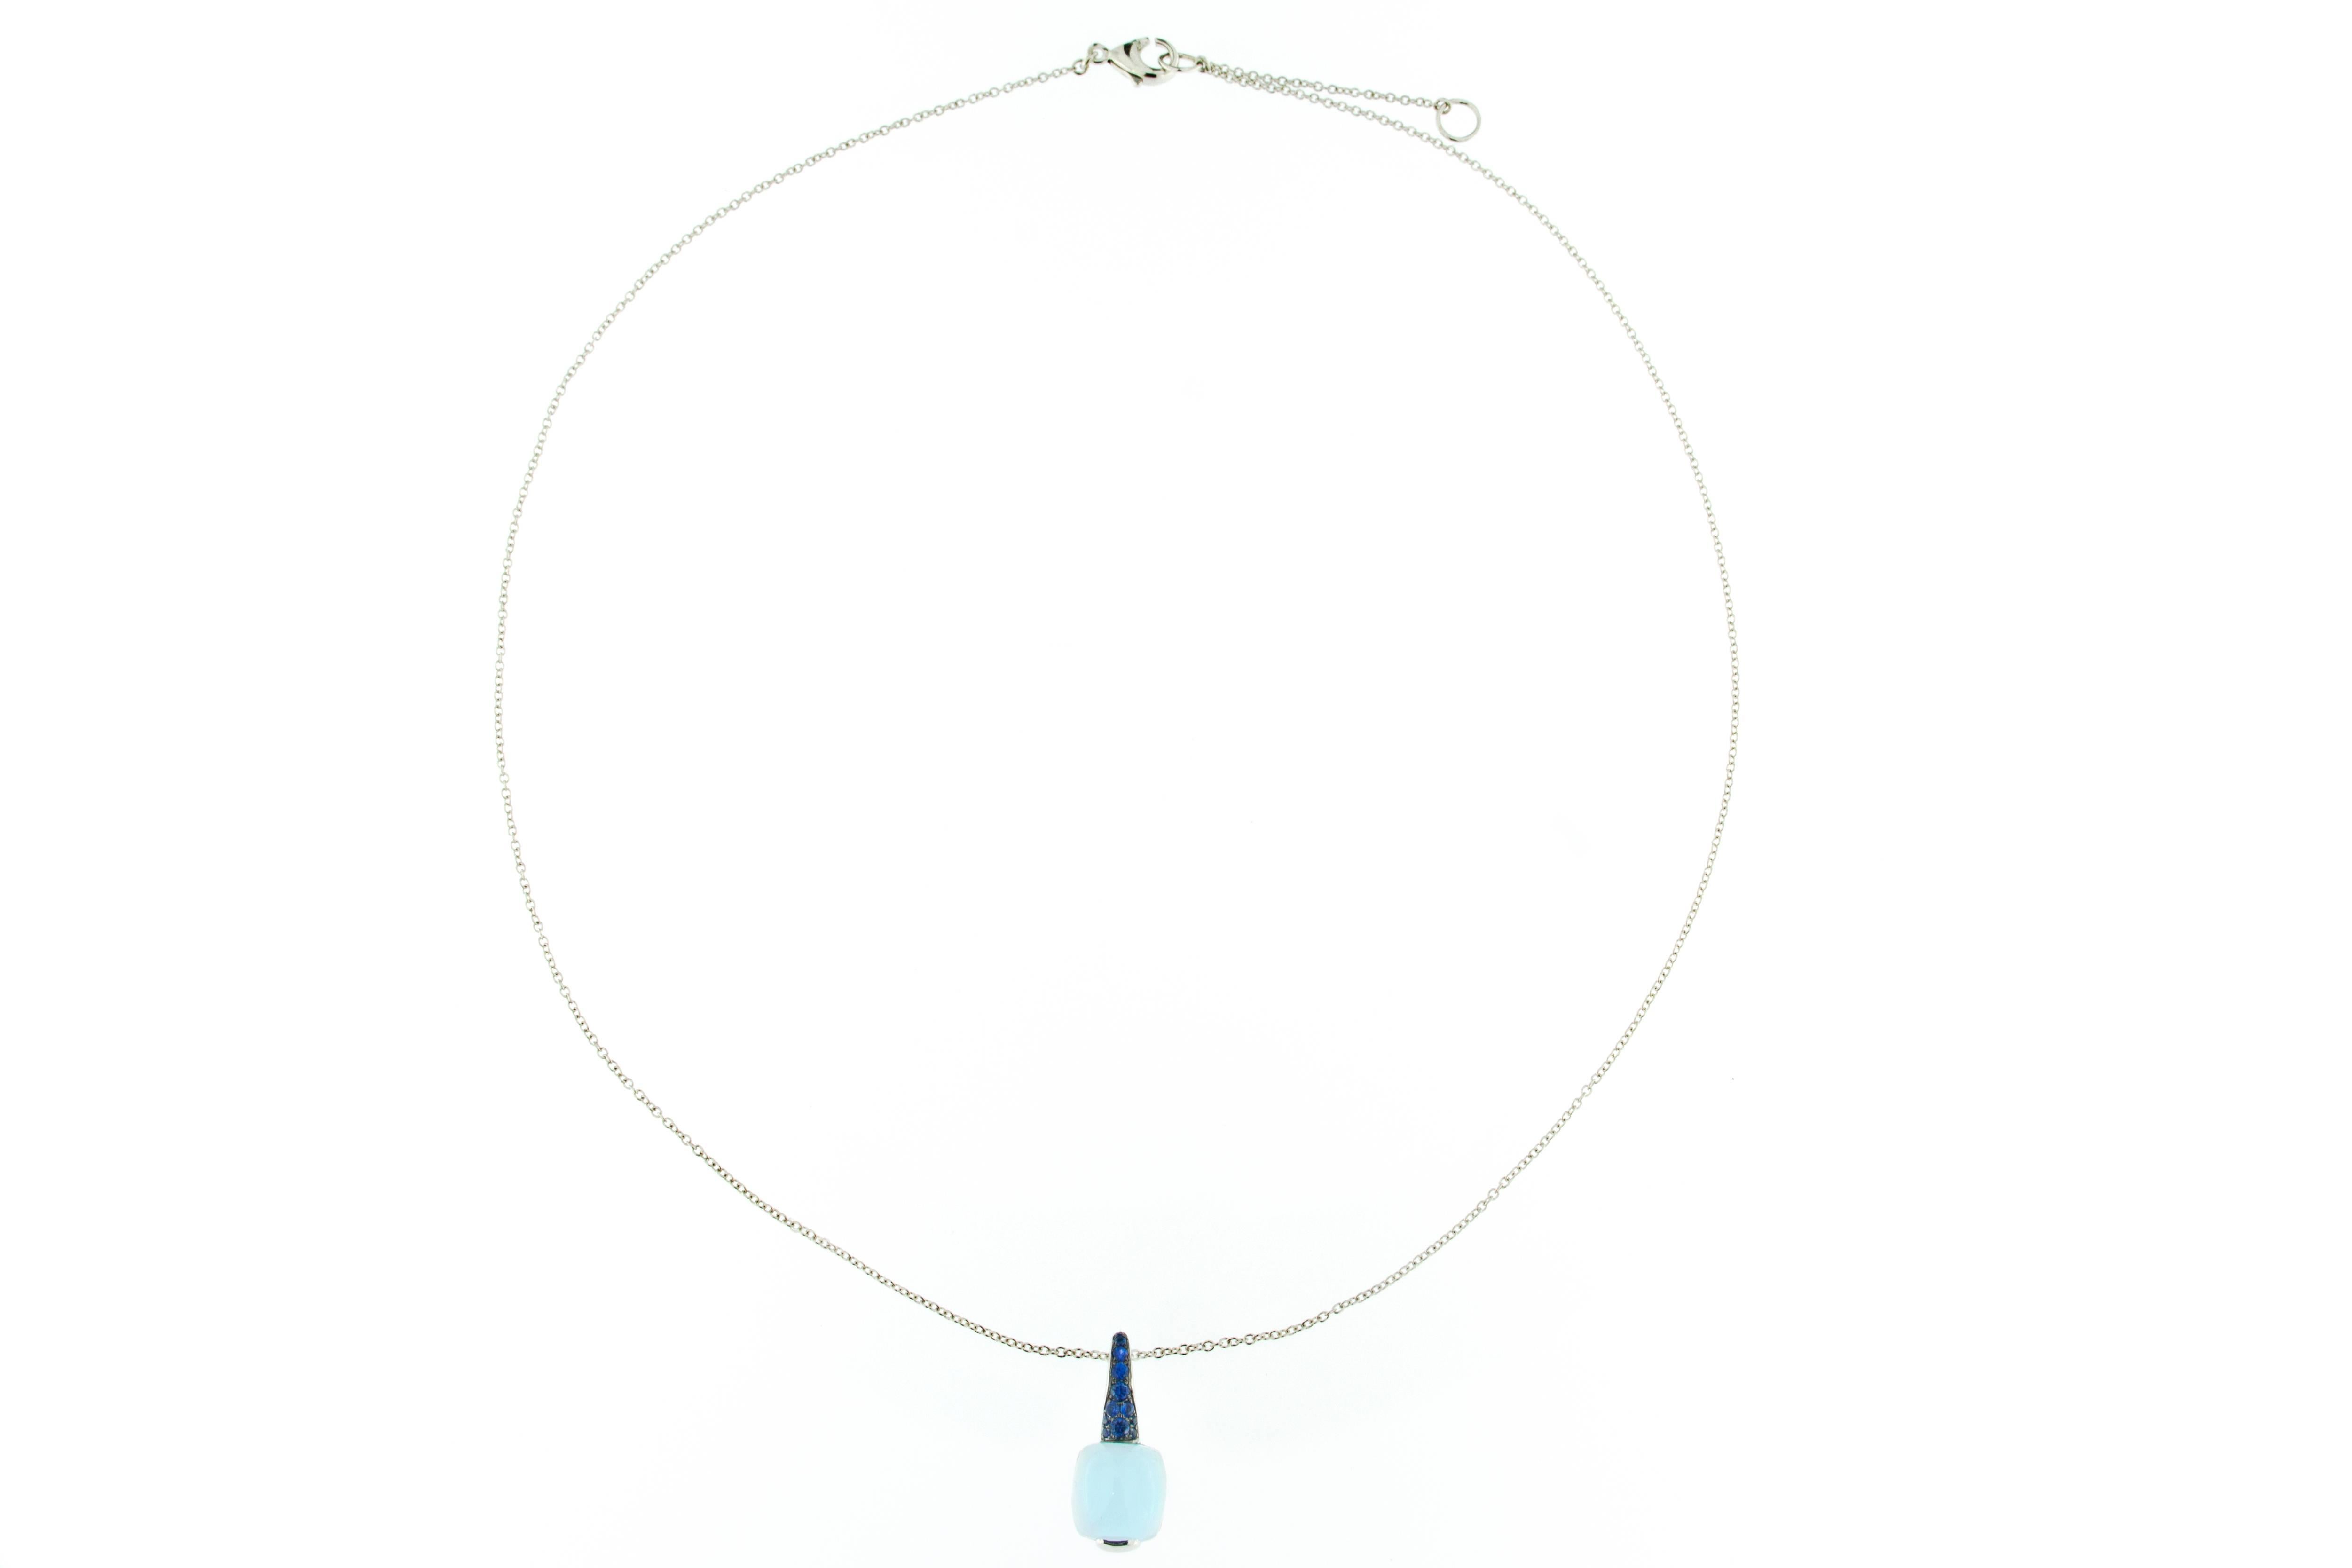 Jona design collection, hand crafted in Italy, 18 karat white gold pendant set with a cabchon aquamarine weighing 3.5 carats and 0.14 carats of blue sapphires, suspending from a 18 inch long, 18k white gold chain.
Dimensions:0.77 in L / 0.34 in W /